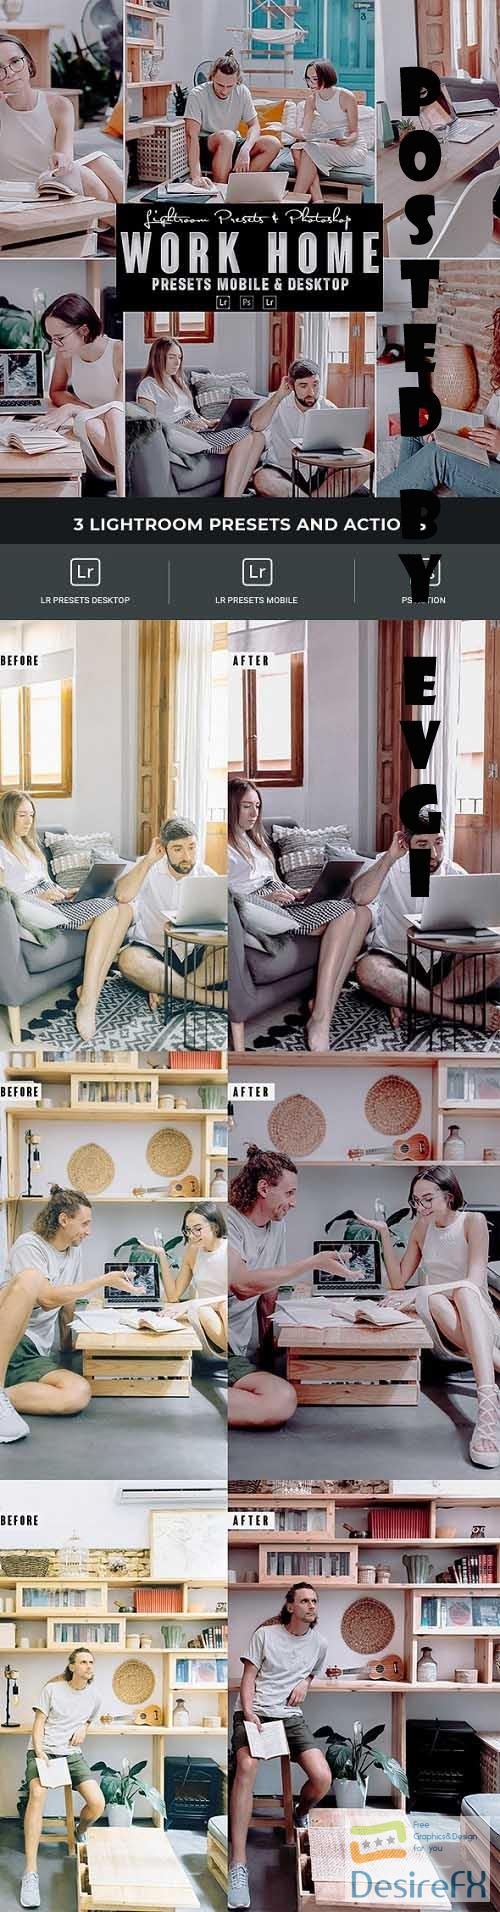 Work Home Photoshop Actions and Lightrom Presets - 34698528